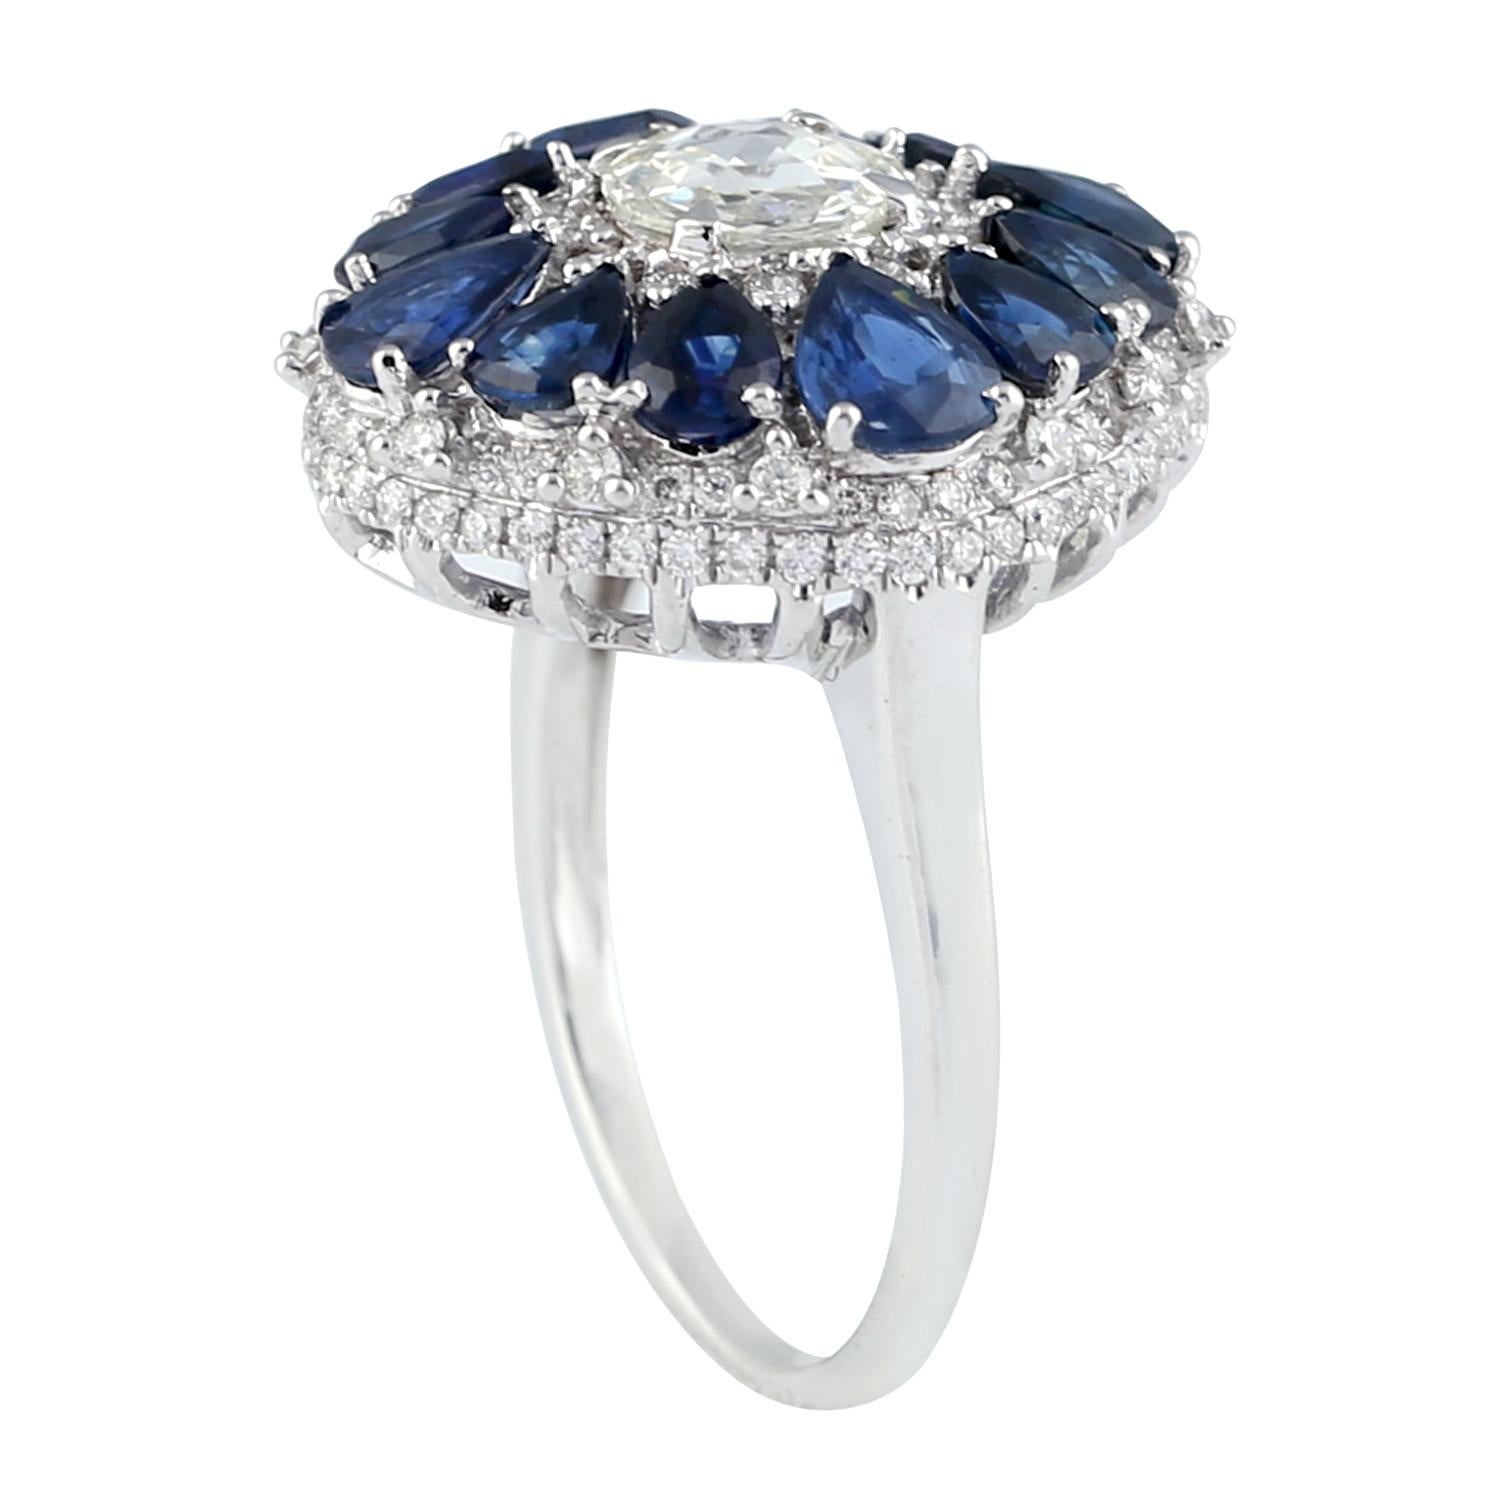 Designer Blue Sapphire and Diamond Floral Ring in 18K White Gold. 

Ring Size: 6.75 ( Can be sized )

18K Gold: 6.4gms
Diamond: 1.1cts
Blue Sapphire: 2.99cts